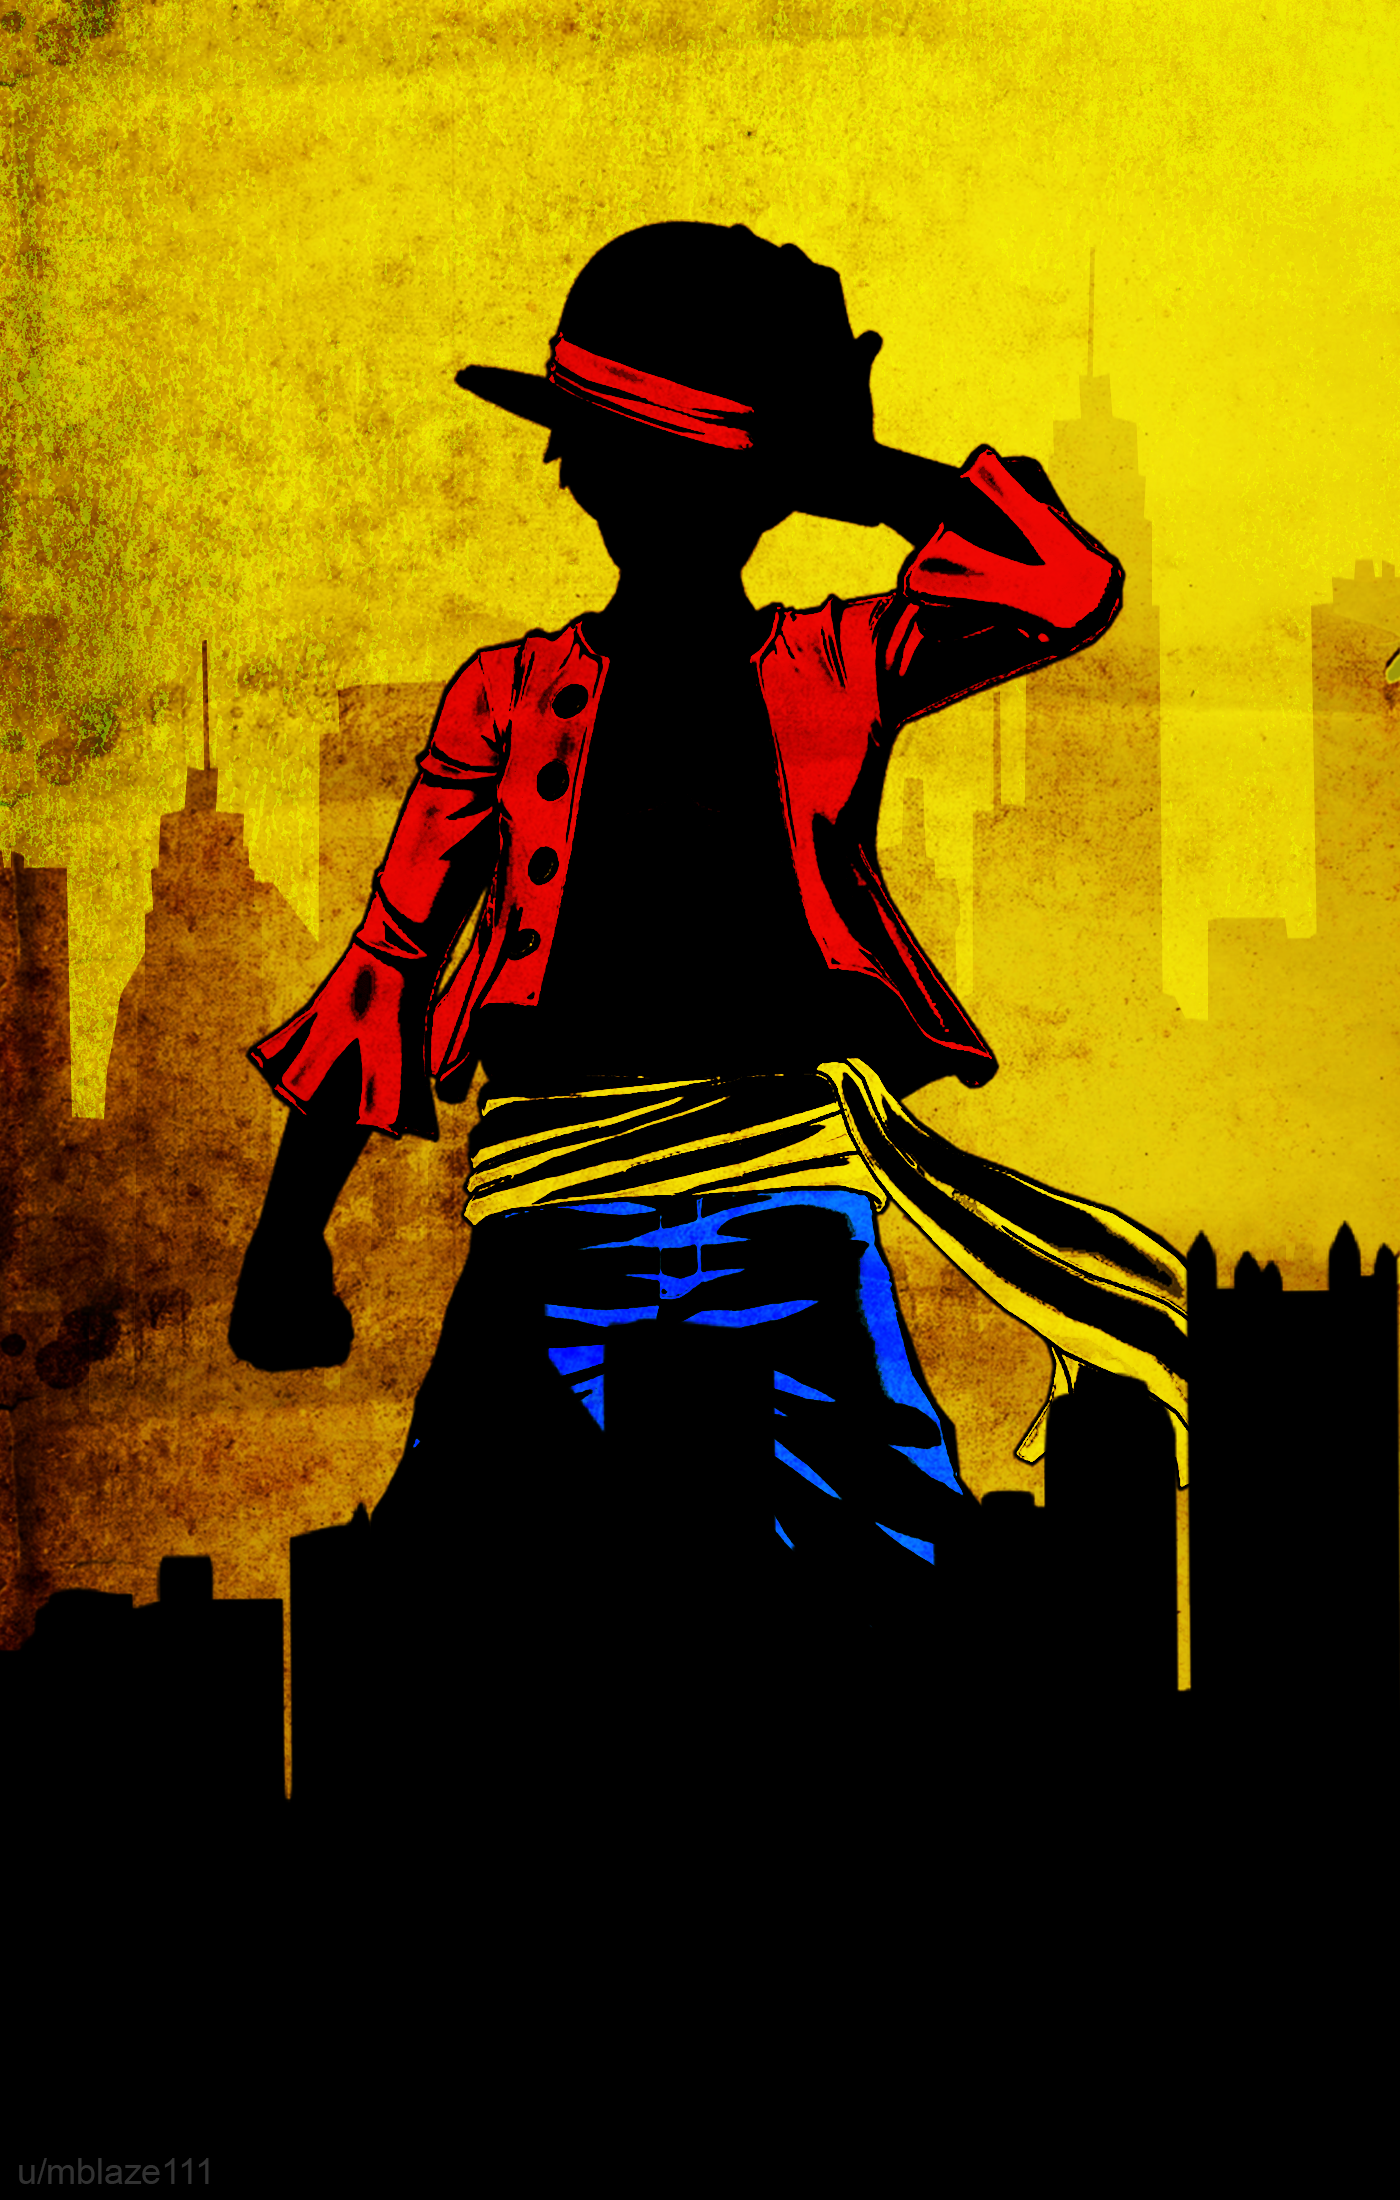 Made a Luffy Wallpaper. Hope you guys like it. Planning to make